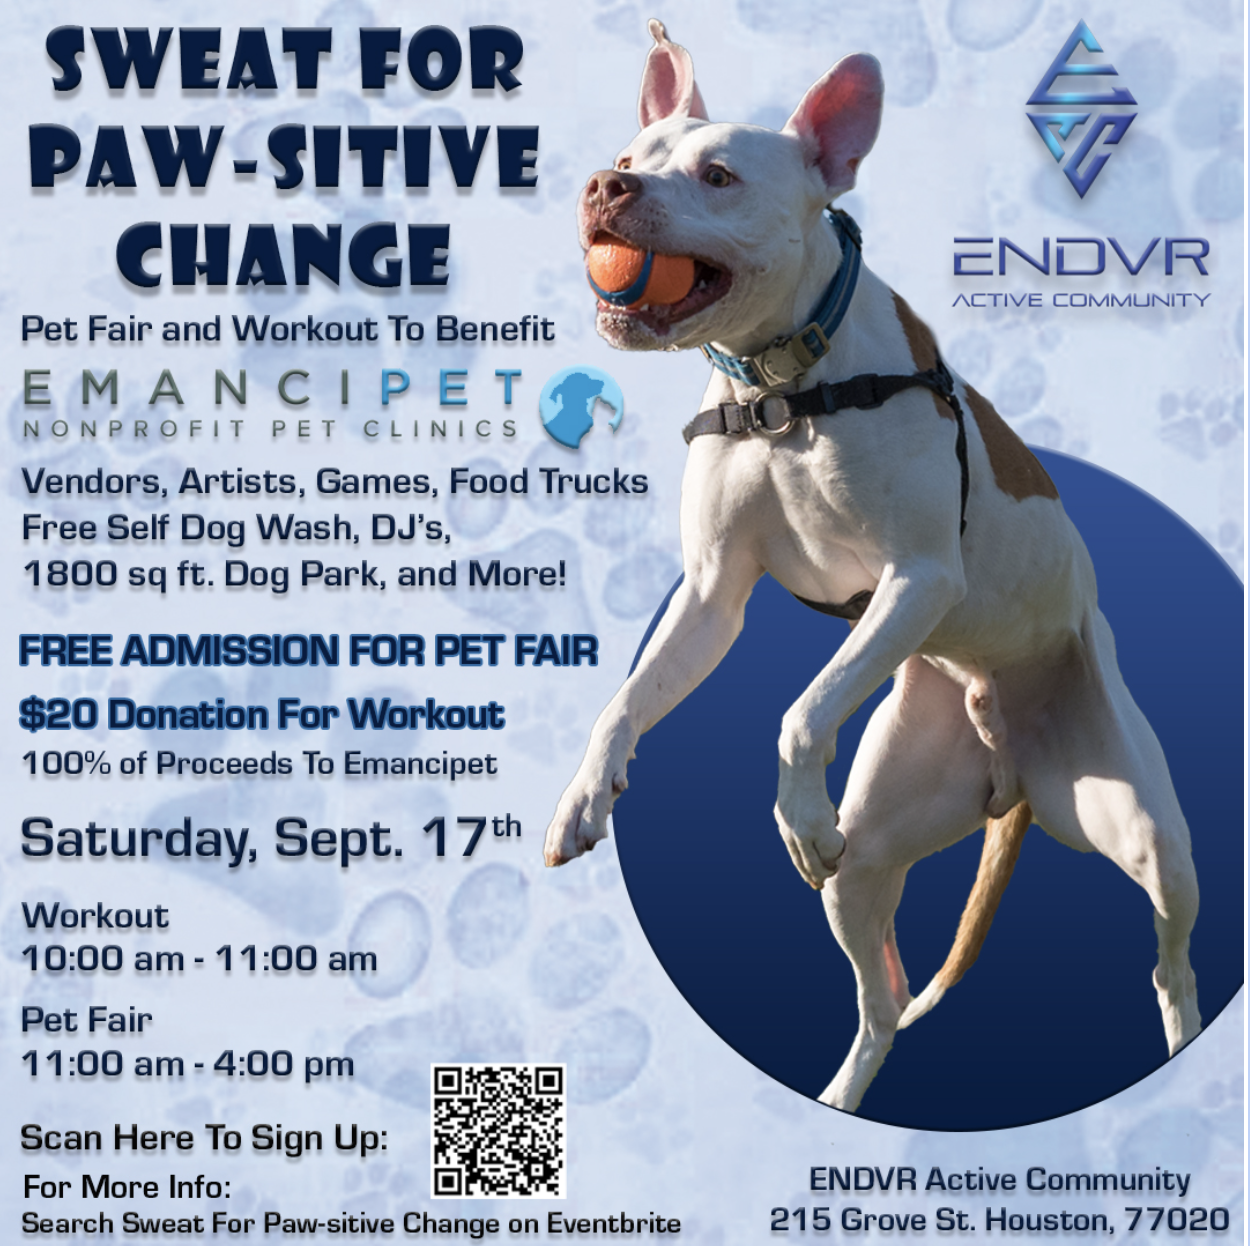 Sweat for Paw-Sitive Change